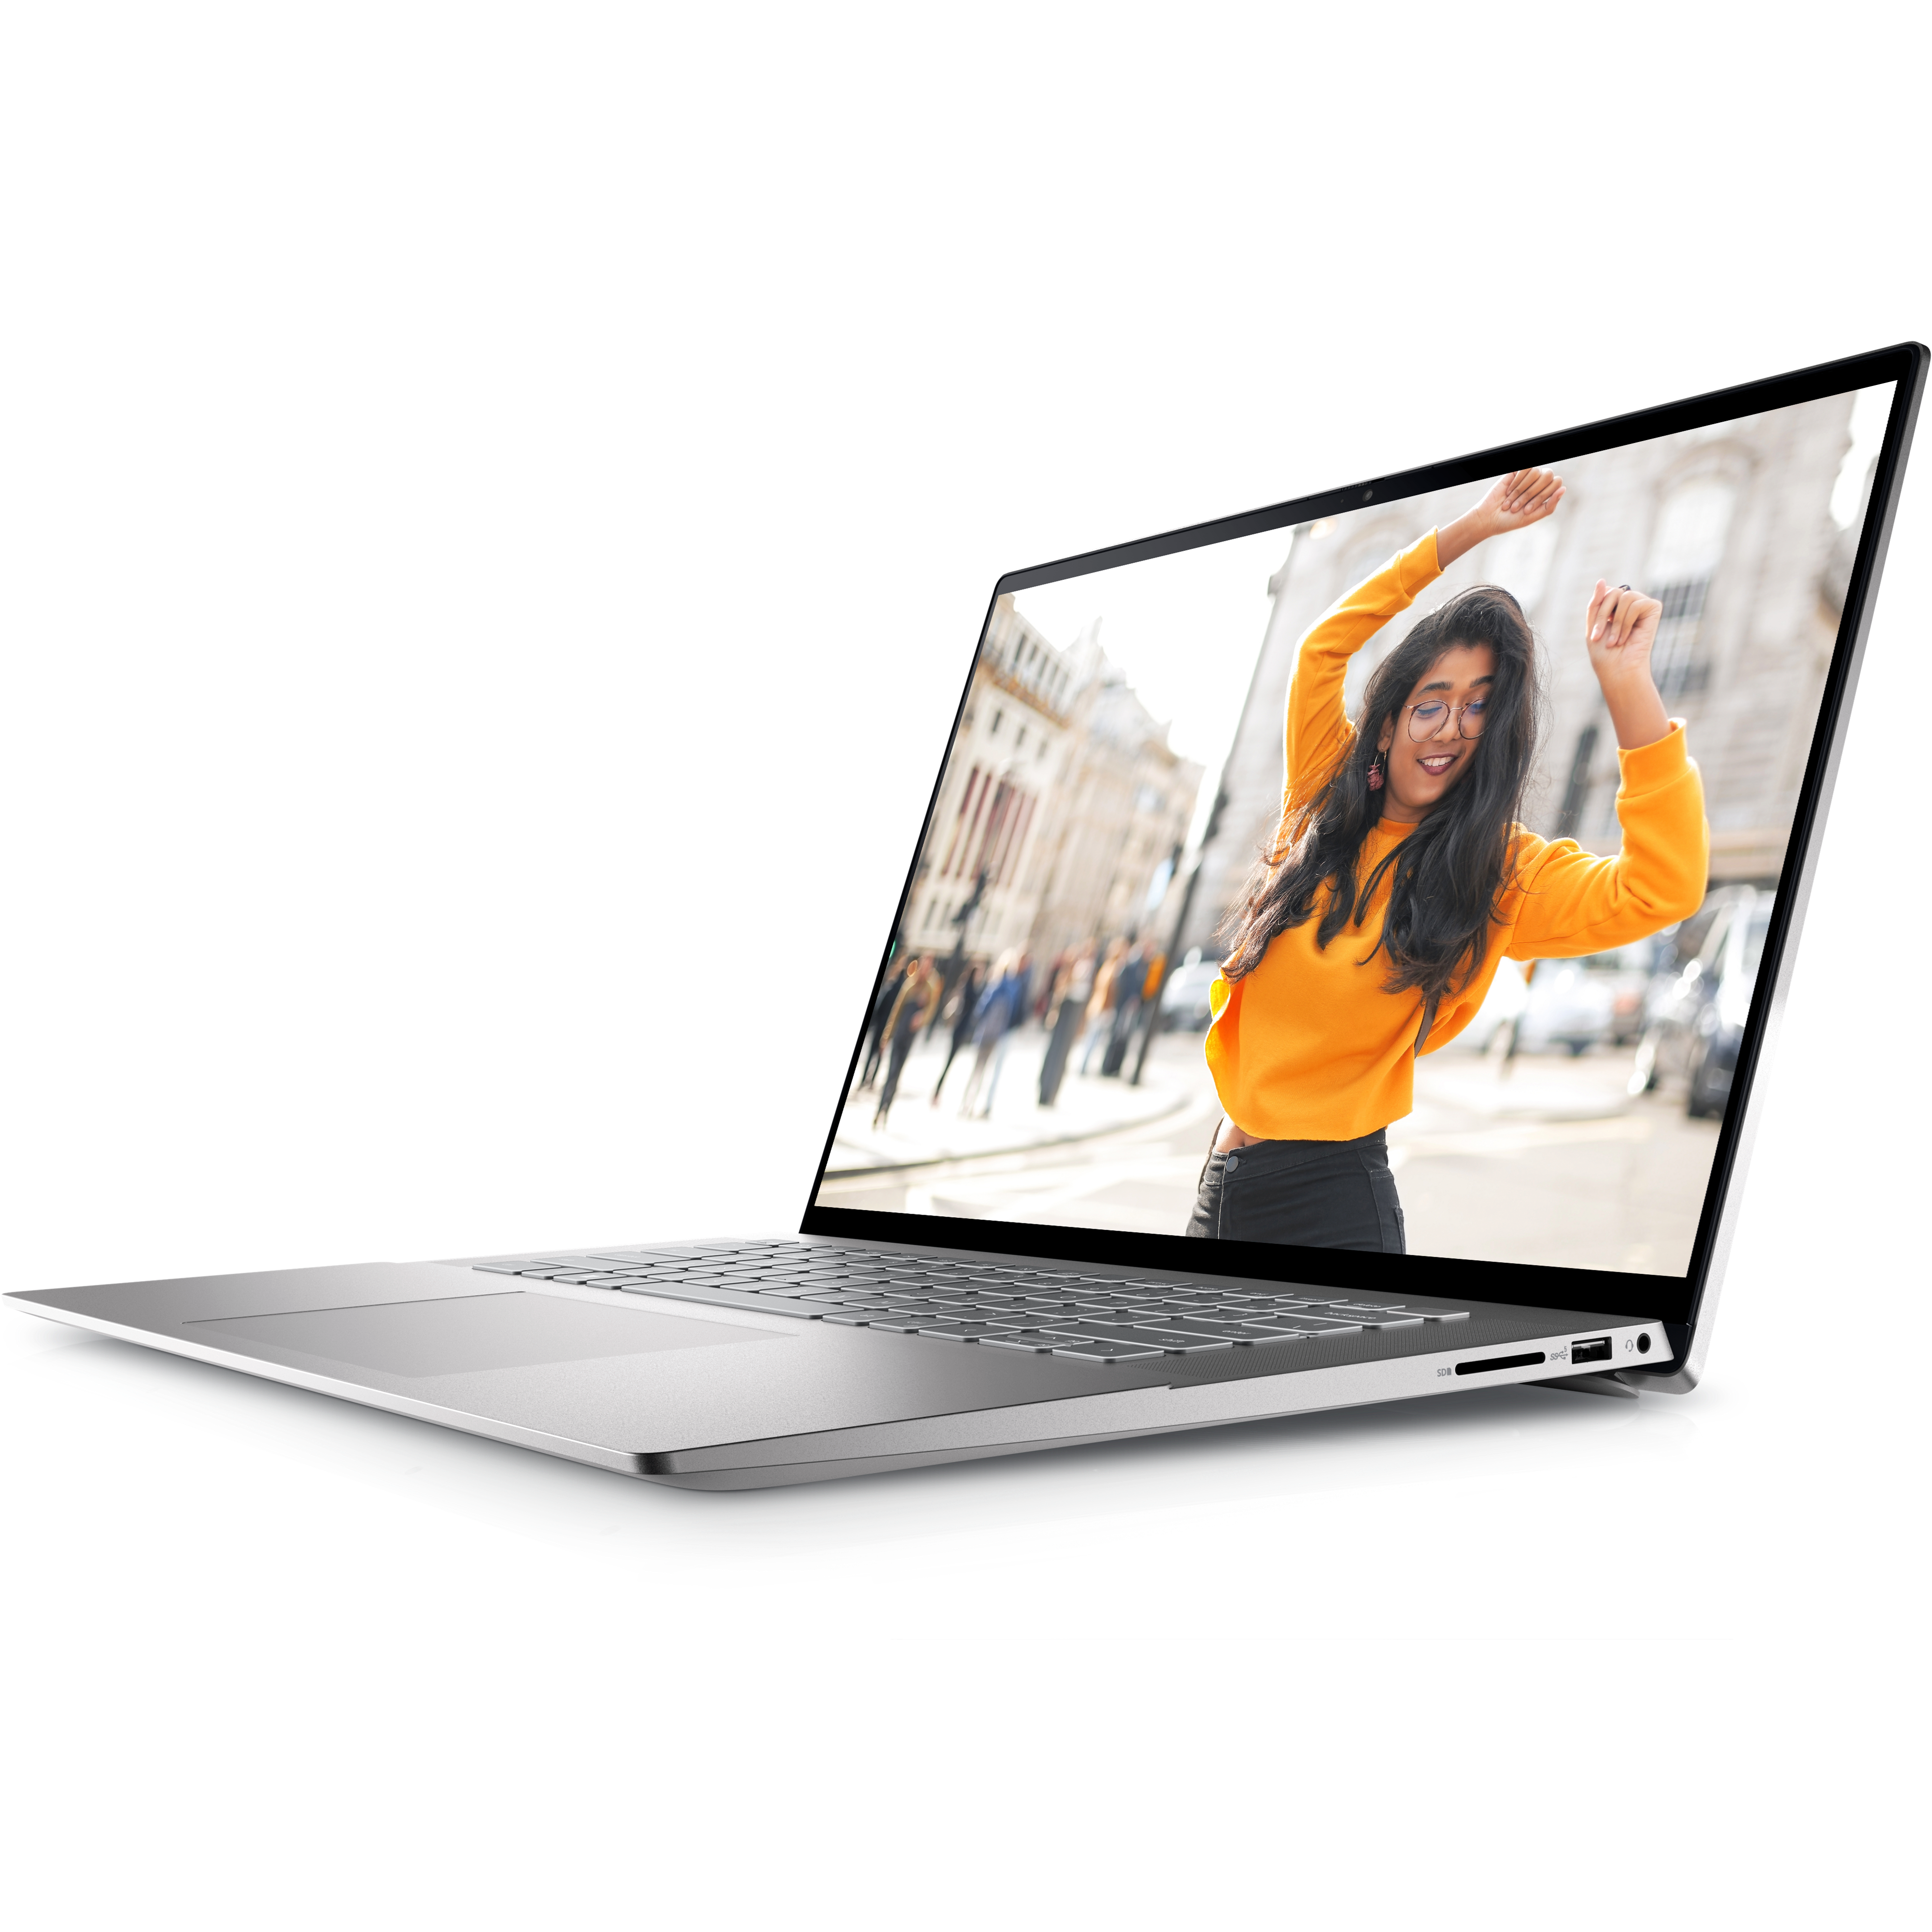 Angled front view of the Dell Inspiron 16 facing left